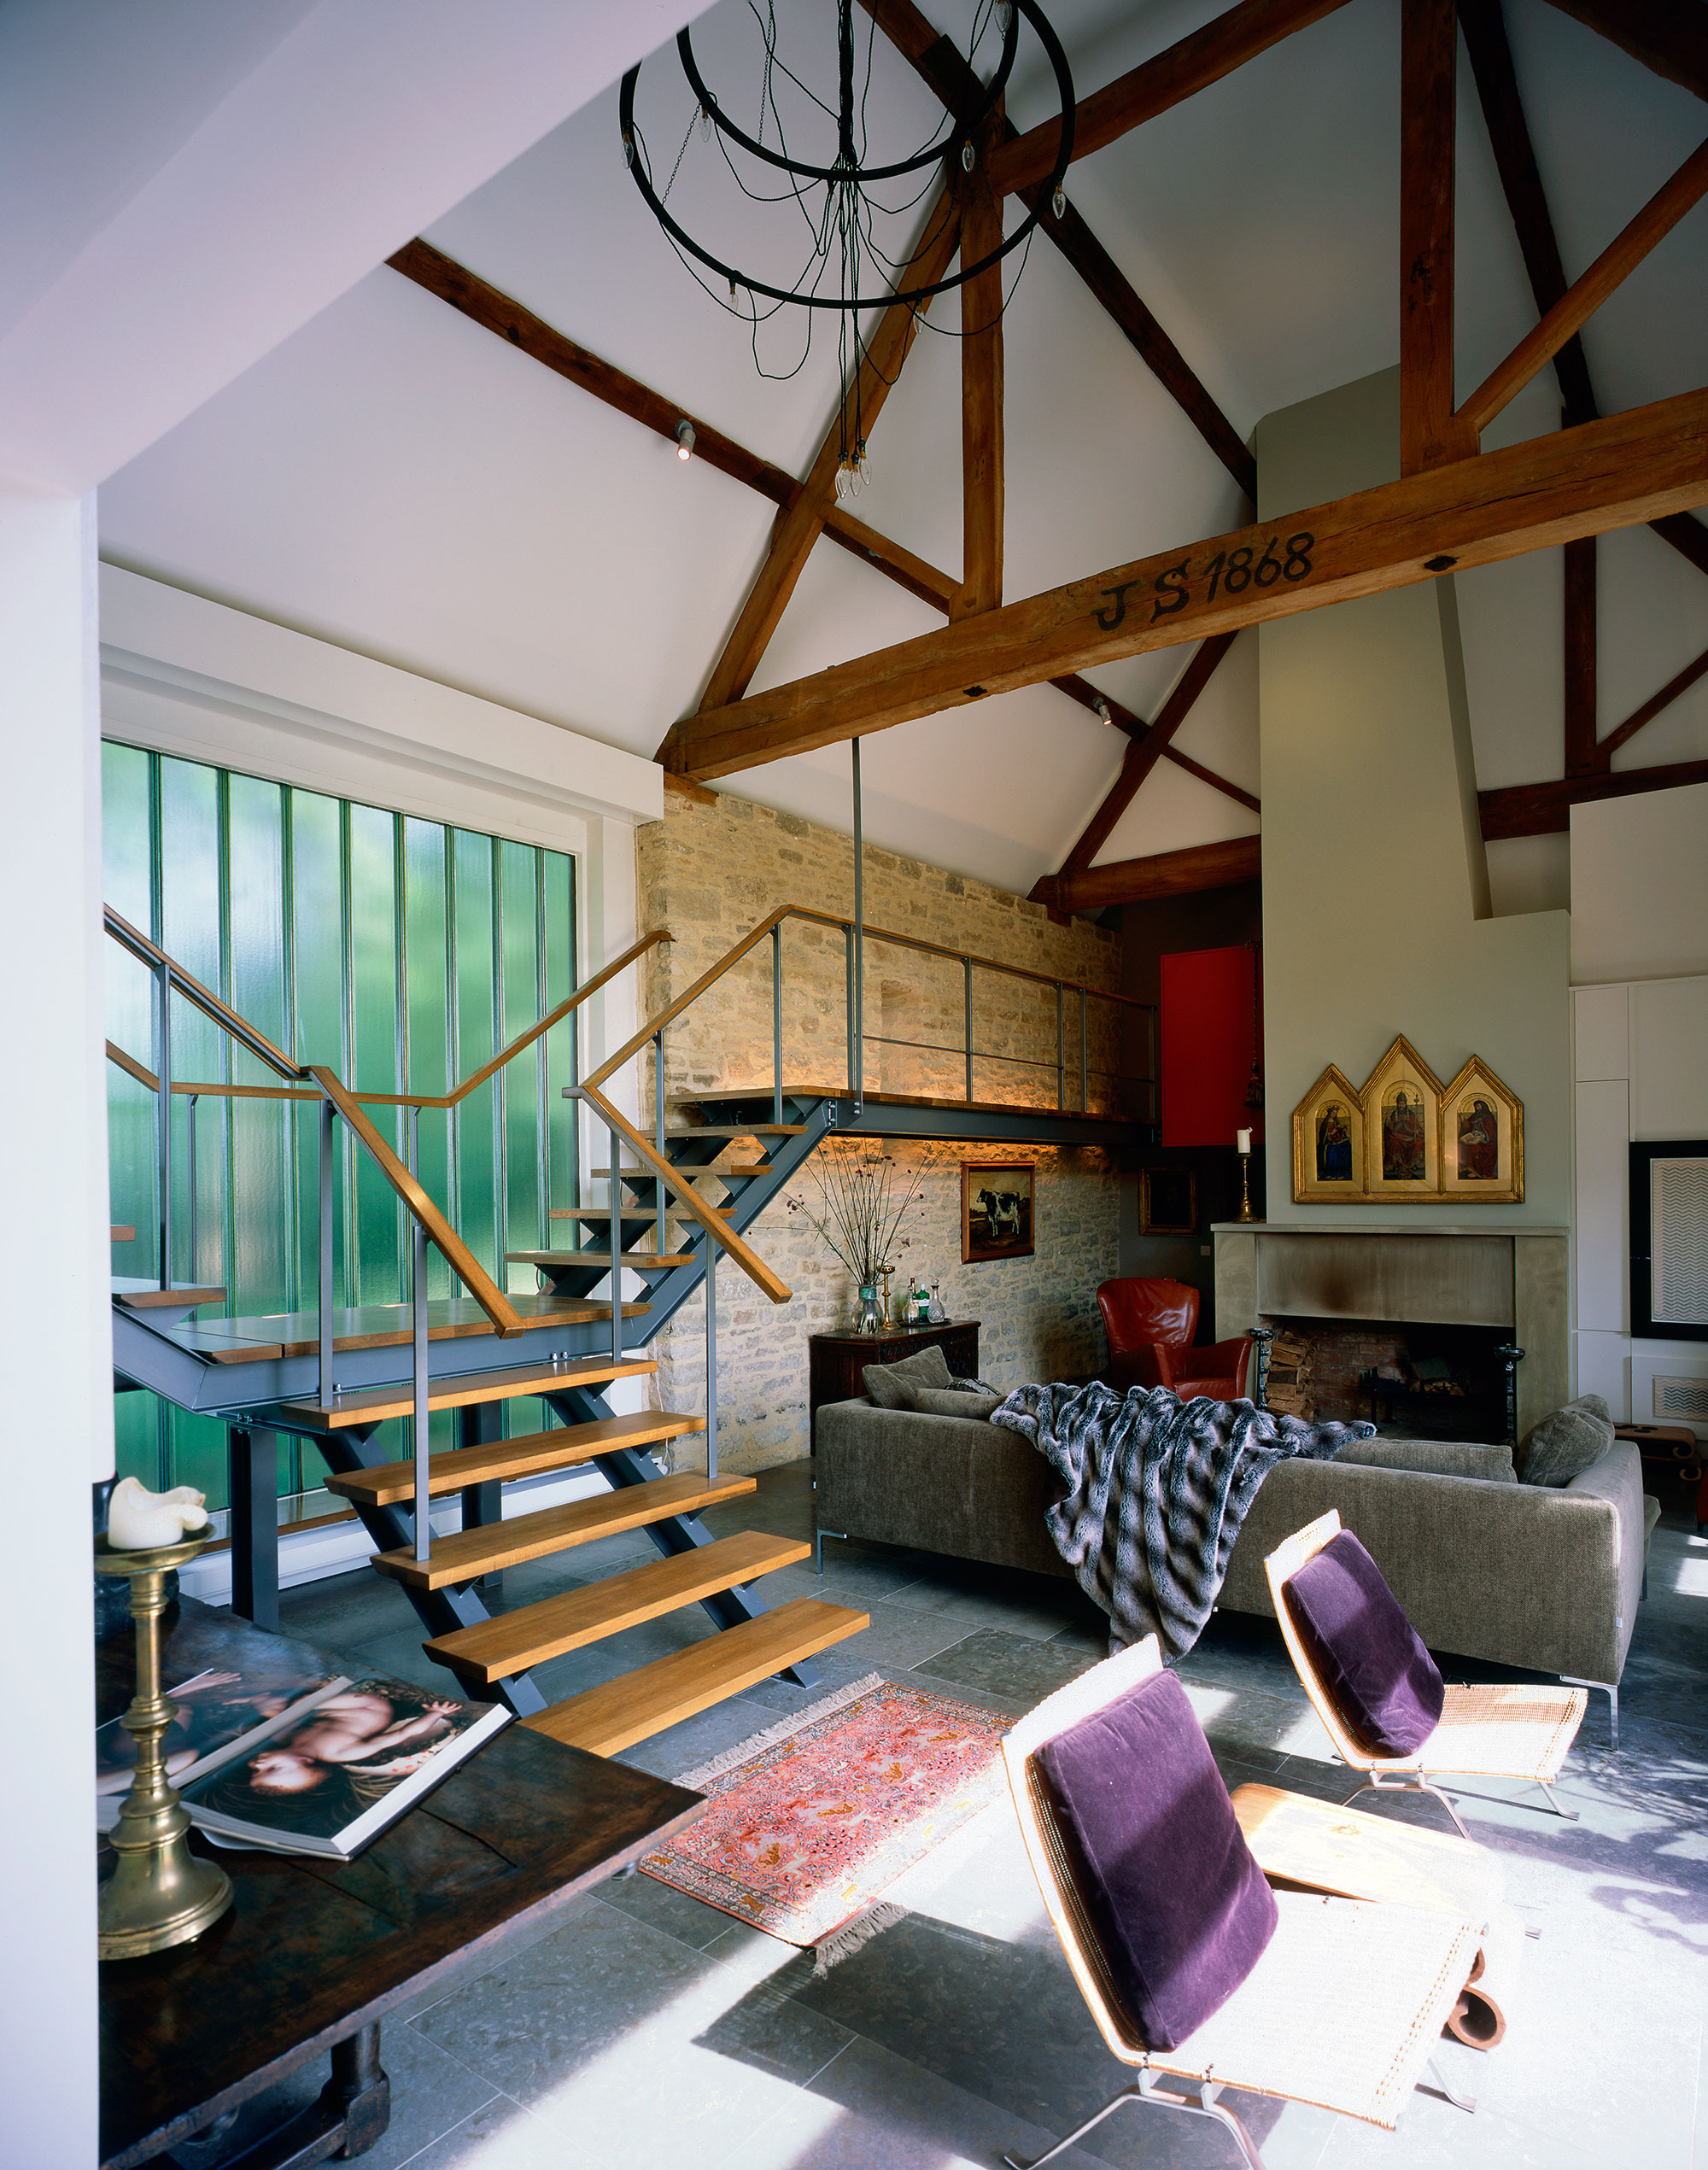 Barn conversion atrium featuring a dramatic double height